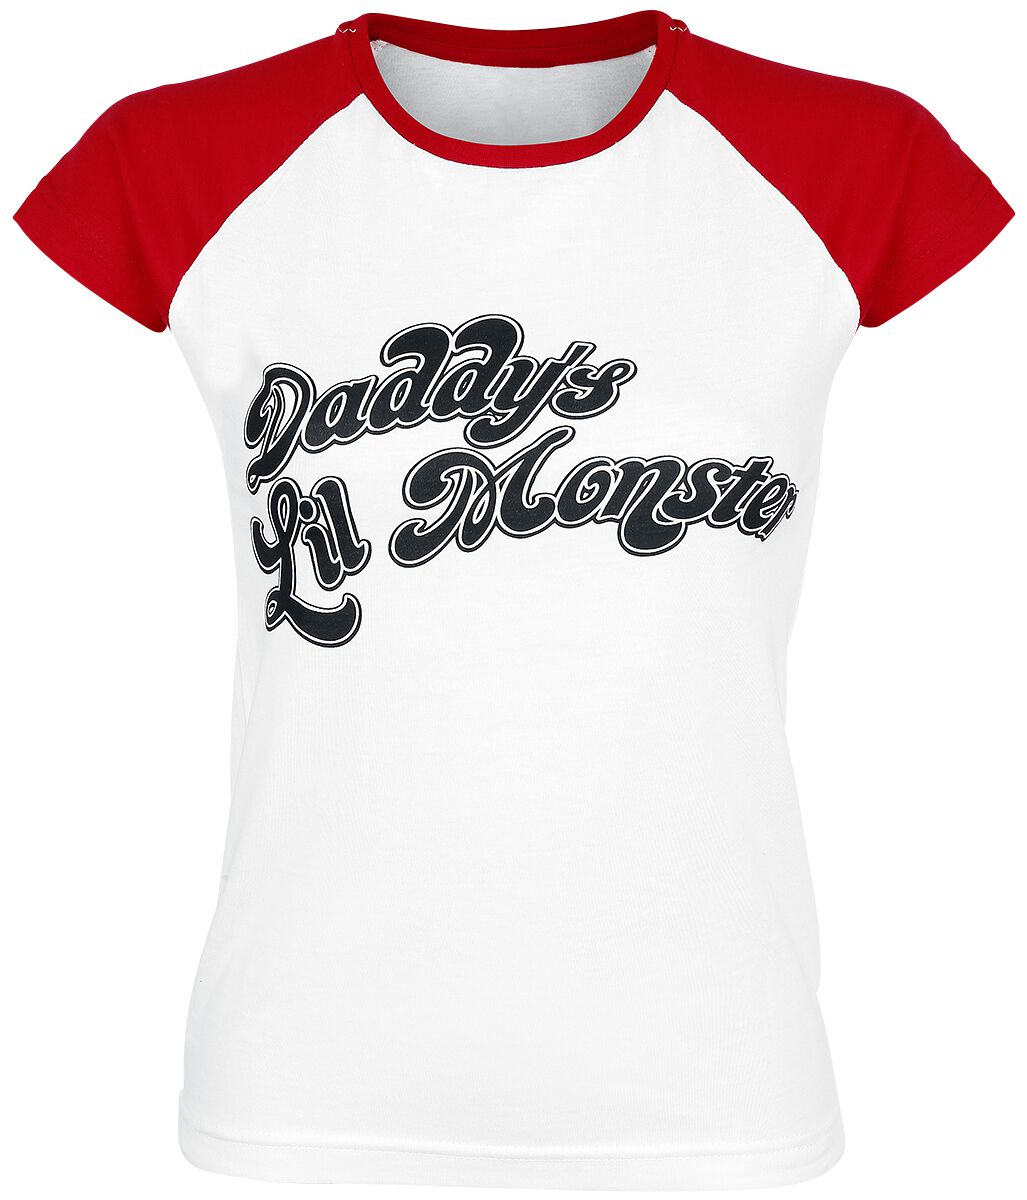 Suicide Squad Daddy's Lil' Monster T-Shirt weiß rot in M von Suicide Squad